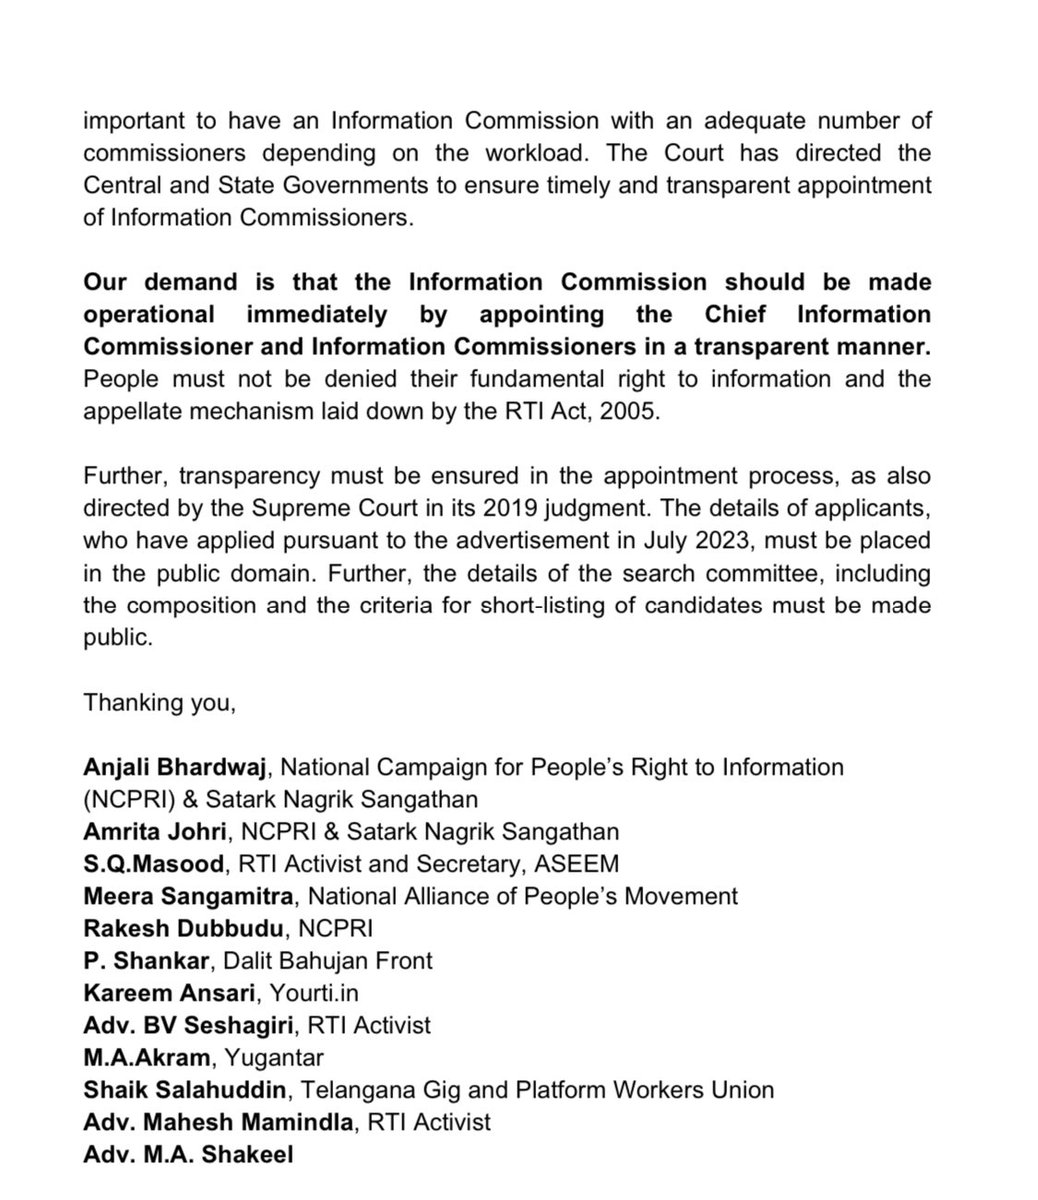 An alliance of RTI activists, including @AnjaliB_ & @SQMasood, are urging action on the State Information Commission's 14-month hiatus. With over 12,000 cases pending, they press for transparent appointments to uphold citizens' right to information. #RTI #TransparencyNow